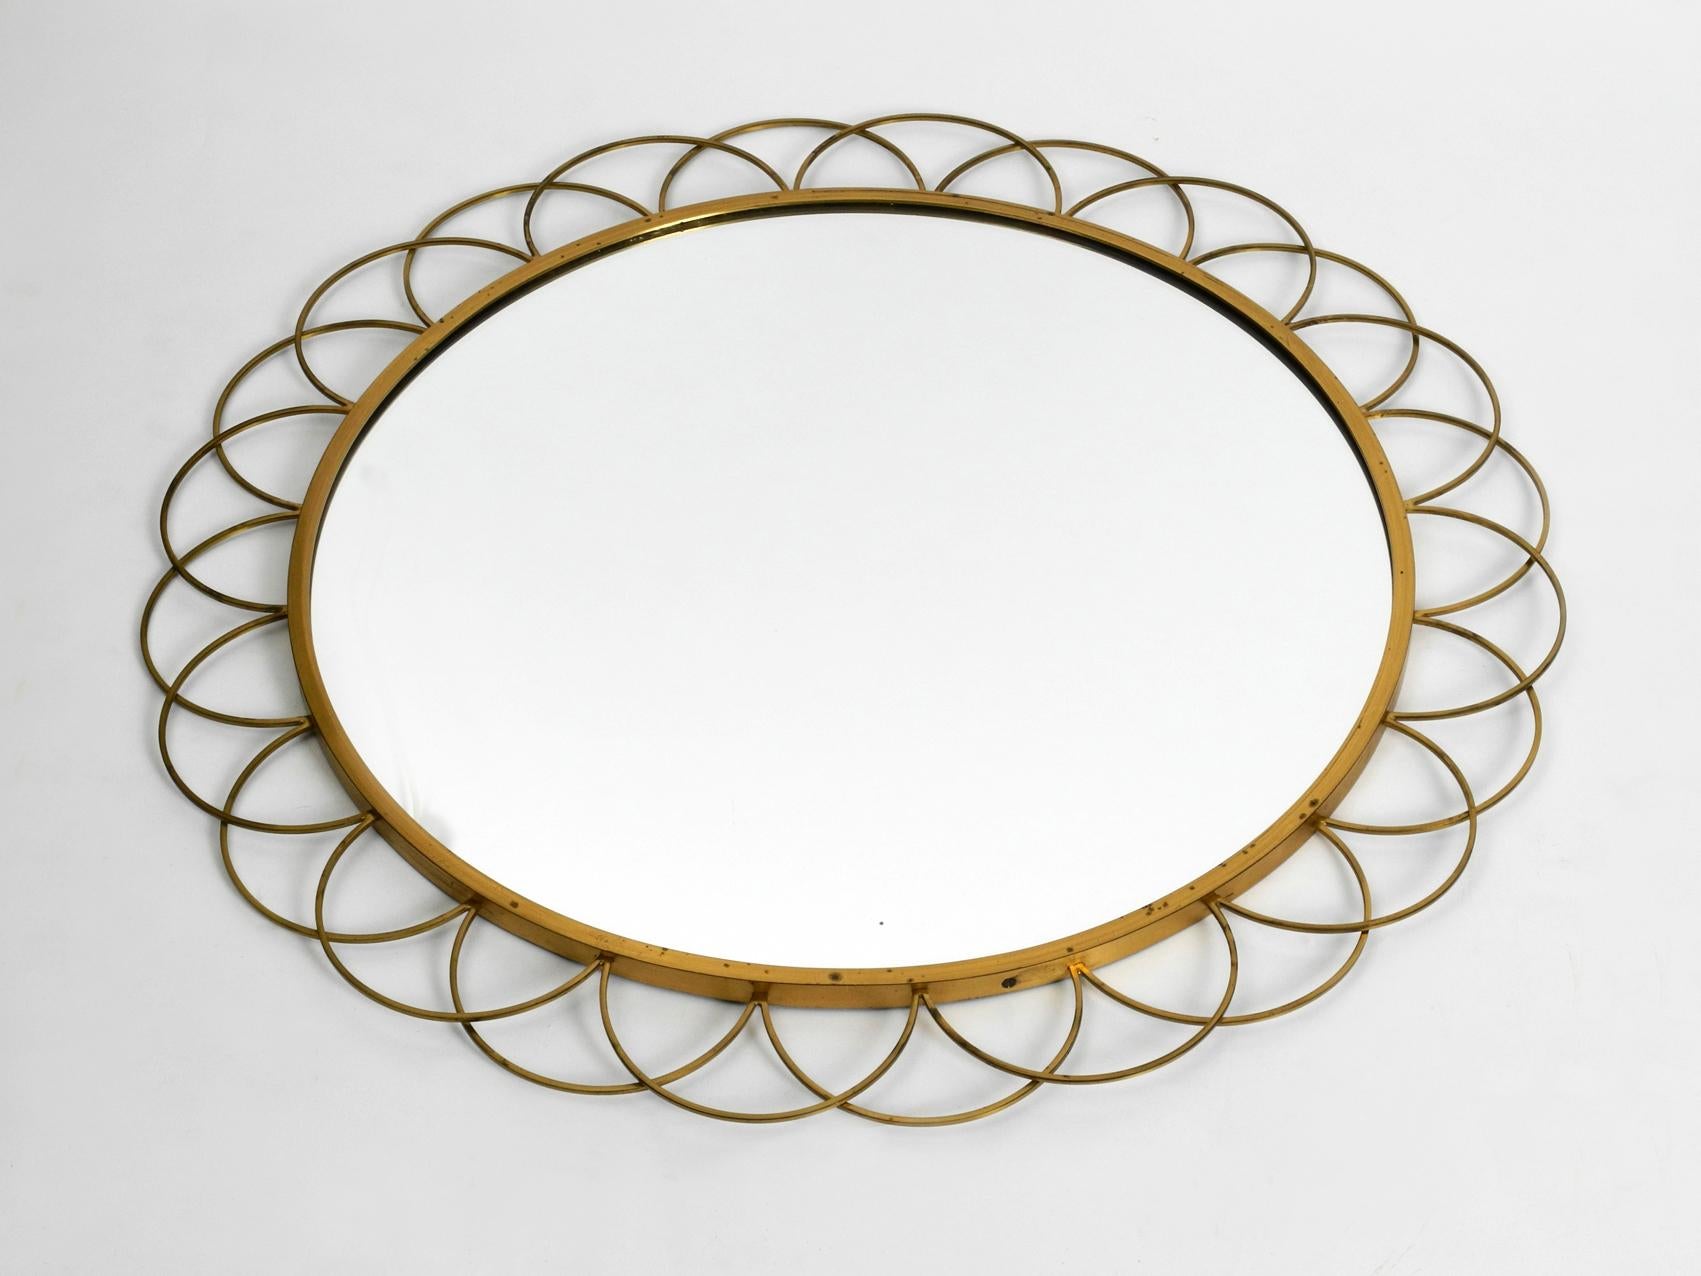 Beautiful rare large Italian brass wall mirror from the early 1960s. Frame and the rings are made of heavy brass. Abstract minimalistic design.
Mirror without damages. No scratches or chipping. Not dusty. Frame with slight patina. No damages to the